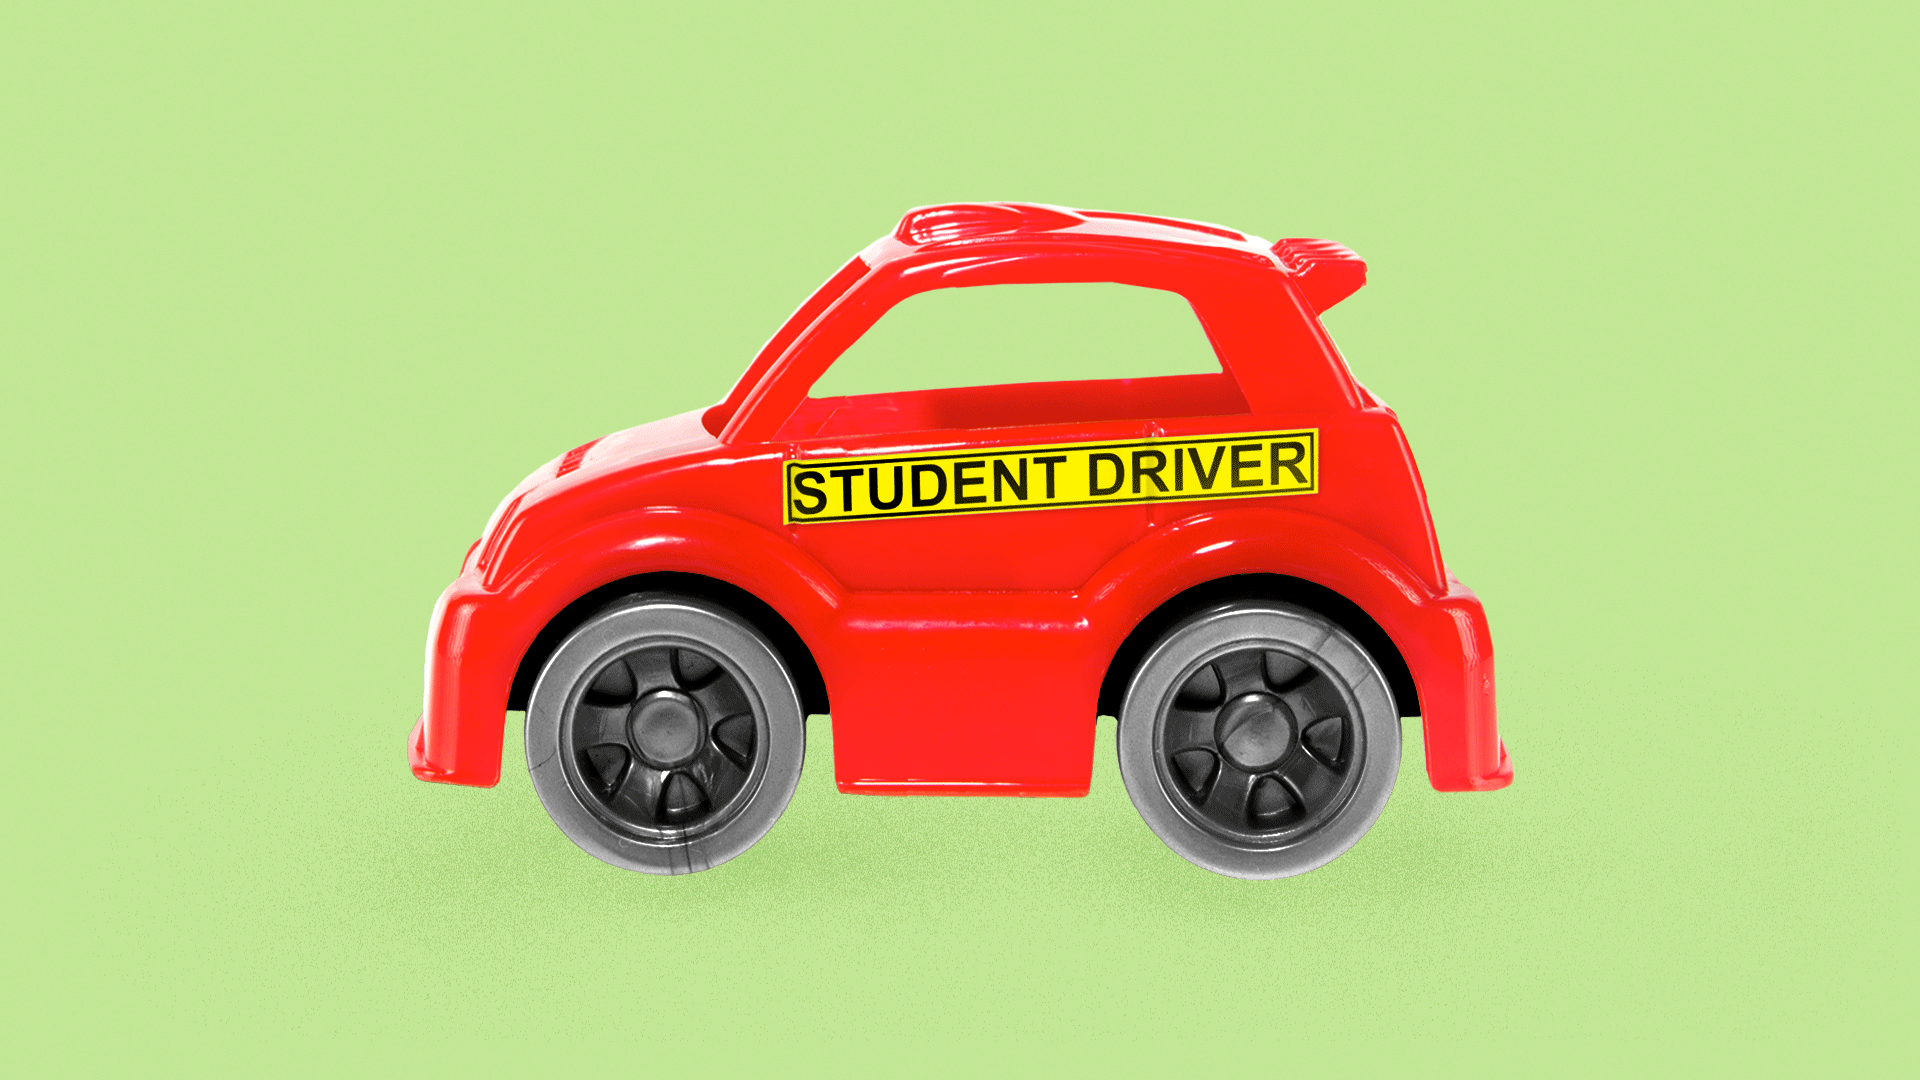 Illustration of a toy car with a "Student Driver" sticker across the side. 